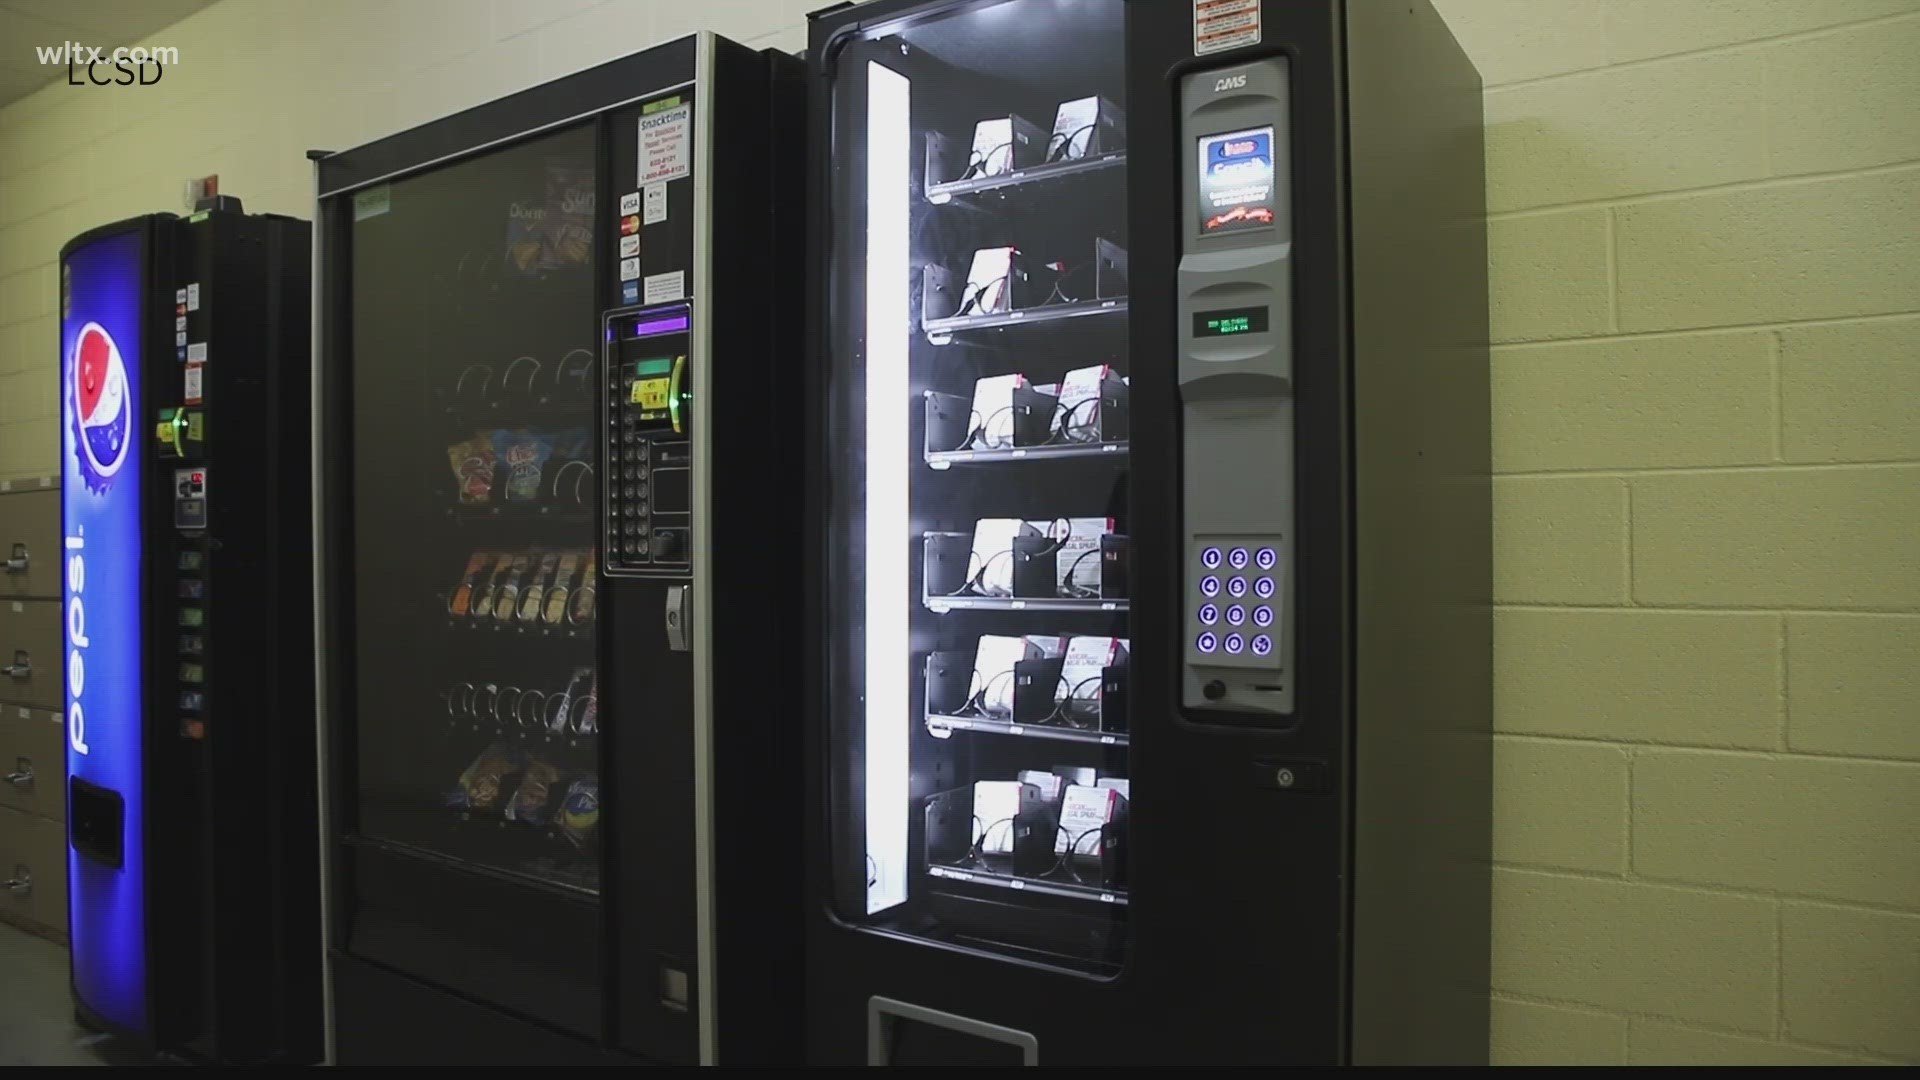 The free vending machine is for former inmates to take with them when they are released.